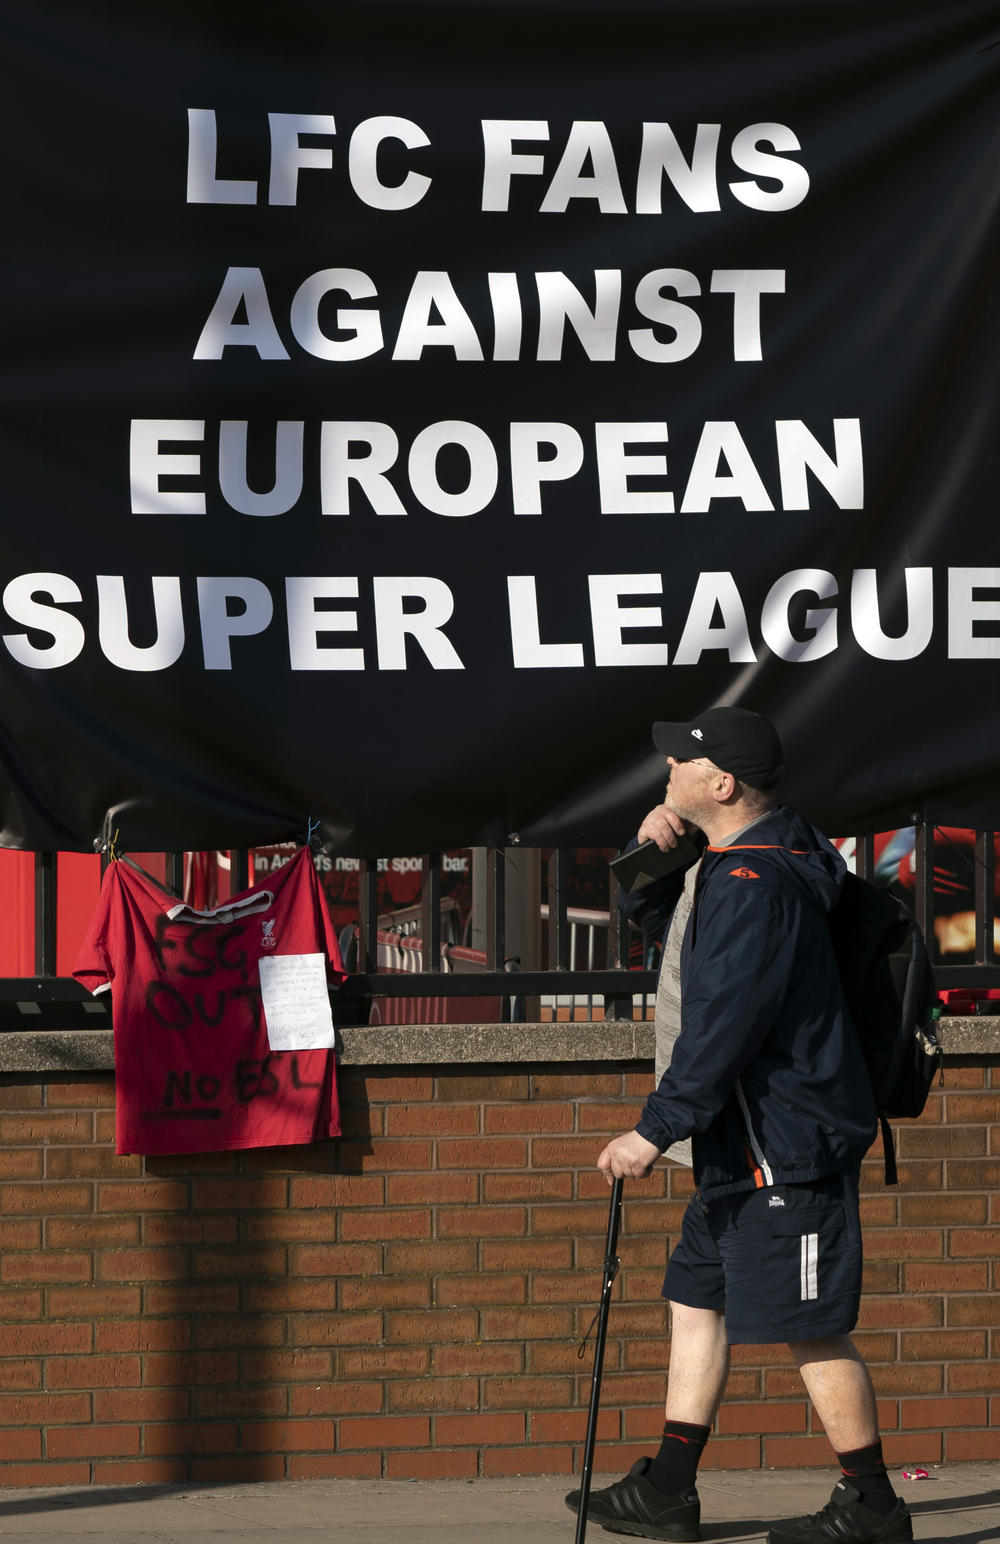 A member of the public passes a banner outside Liverpool's Anfield Stadium protesting the formation of the European Super League.